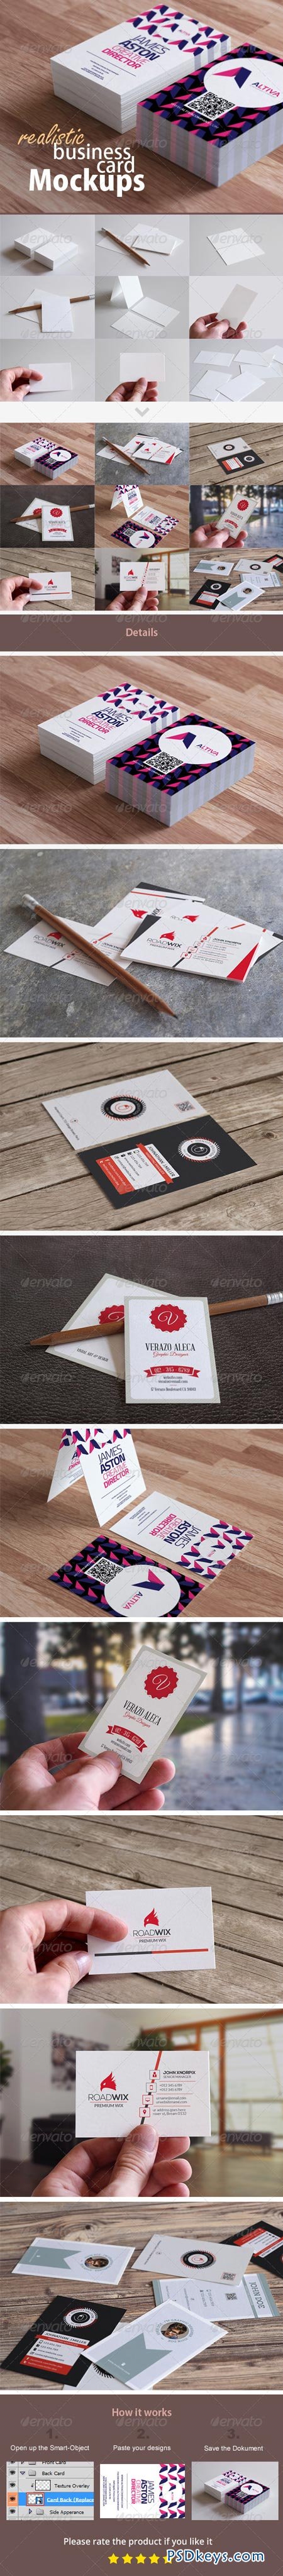 Realistic Business Card Mockups 8687286